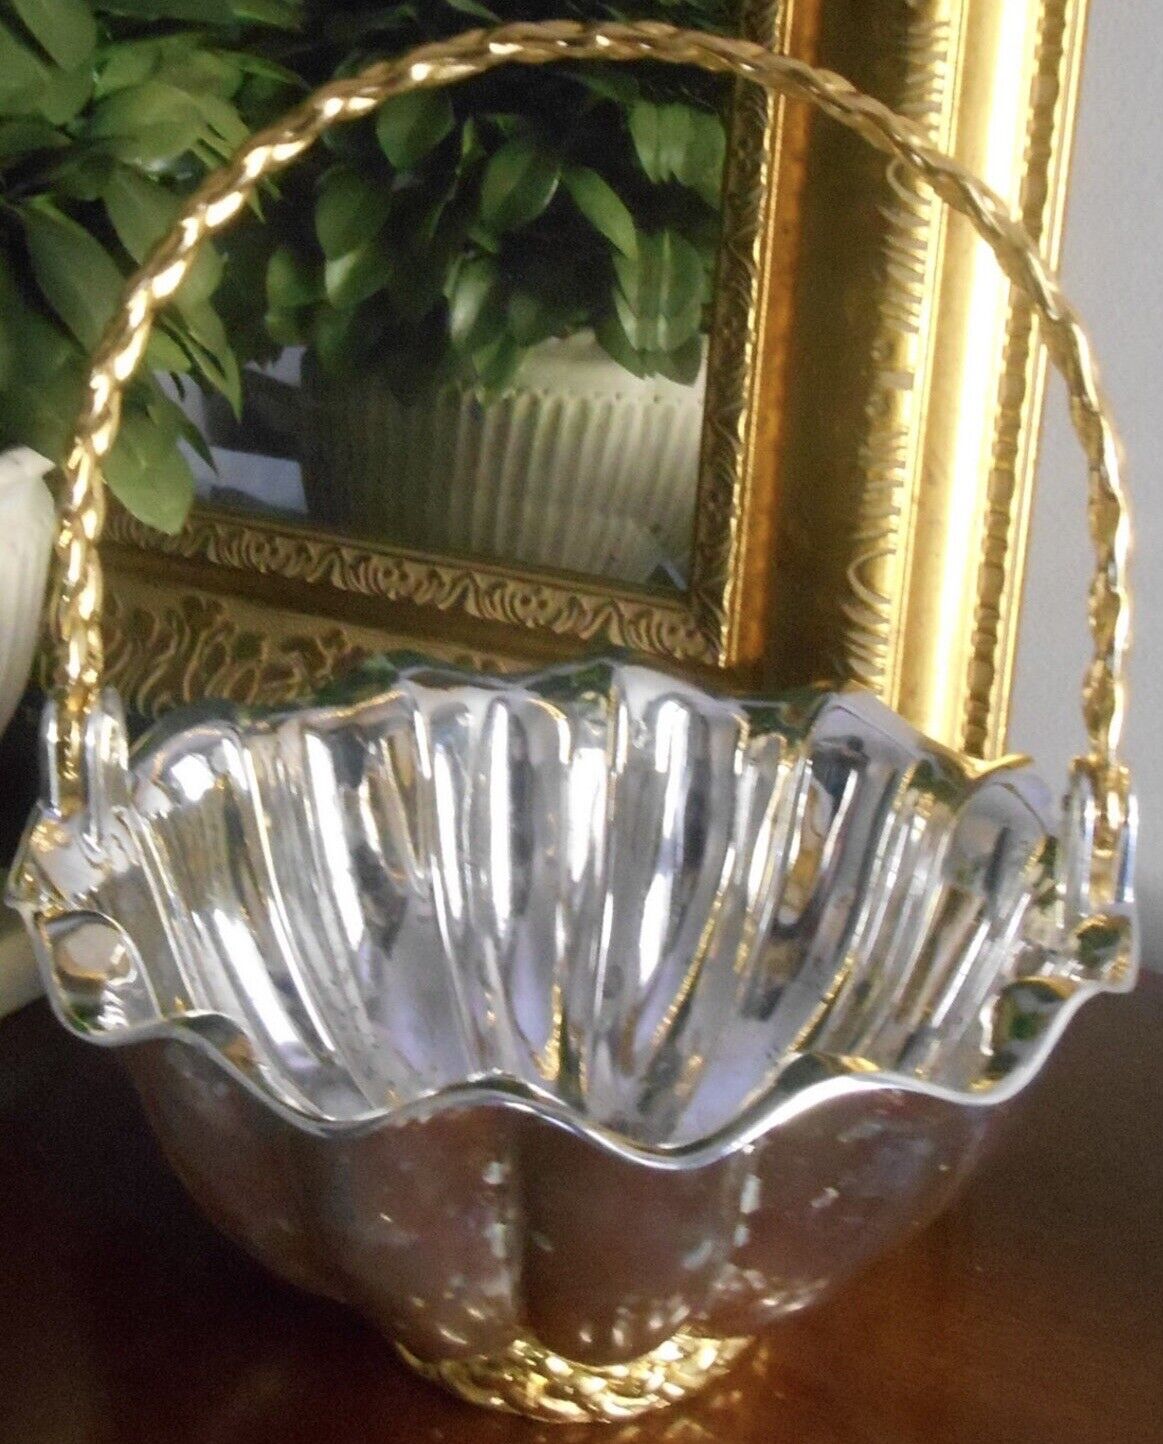 Vintage Silver Plated Decorative Gold and Silver Basket Wedding Decor . Heavy